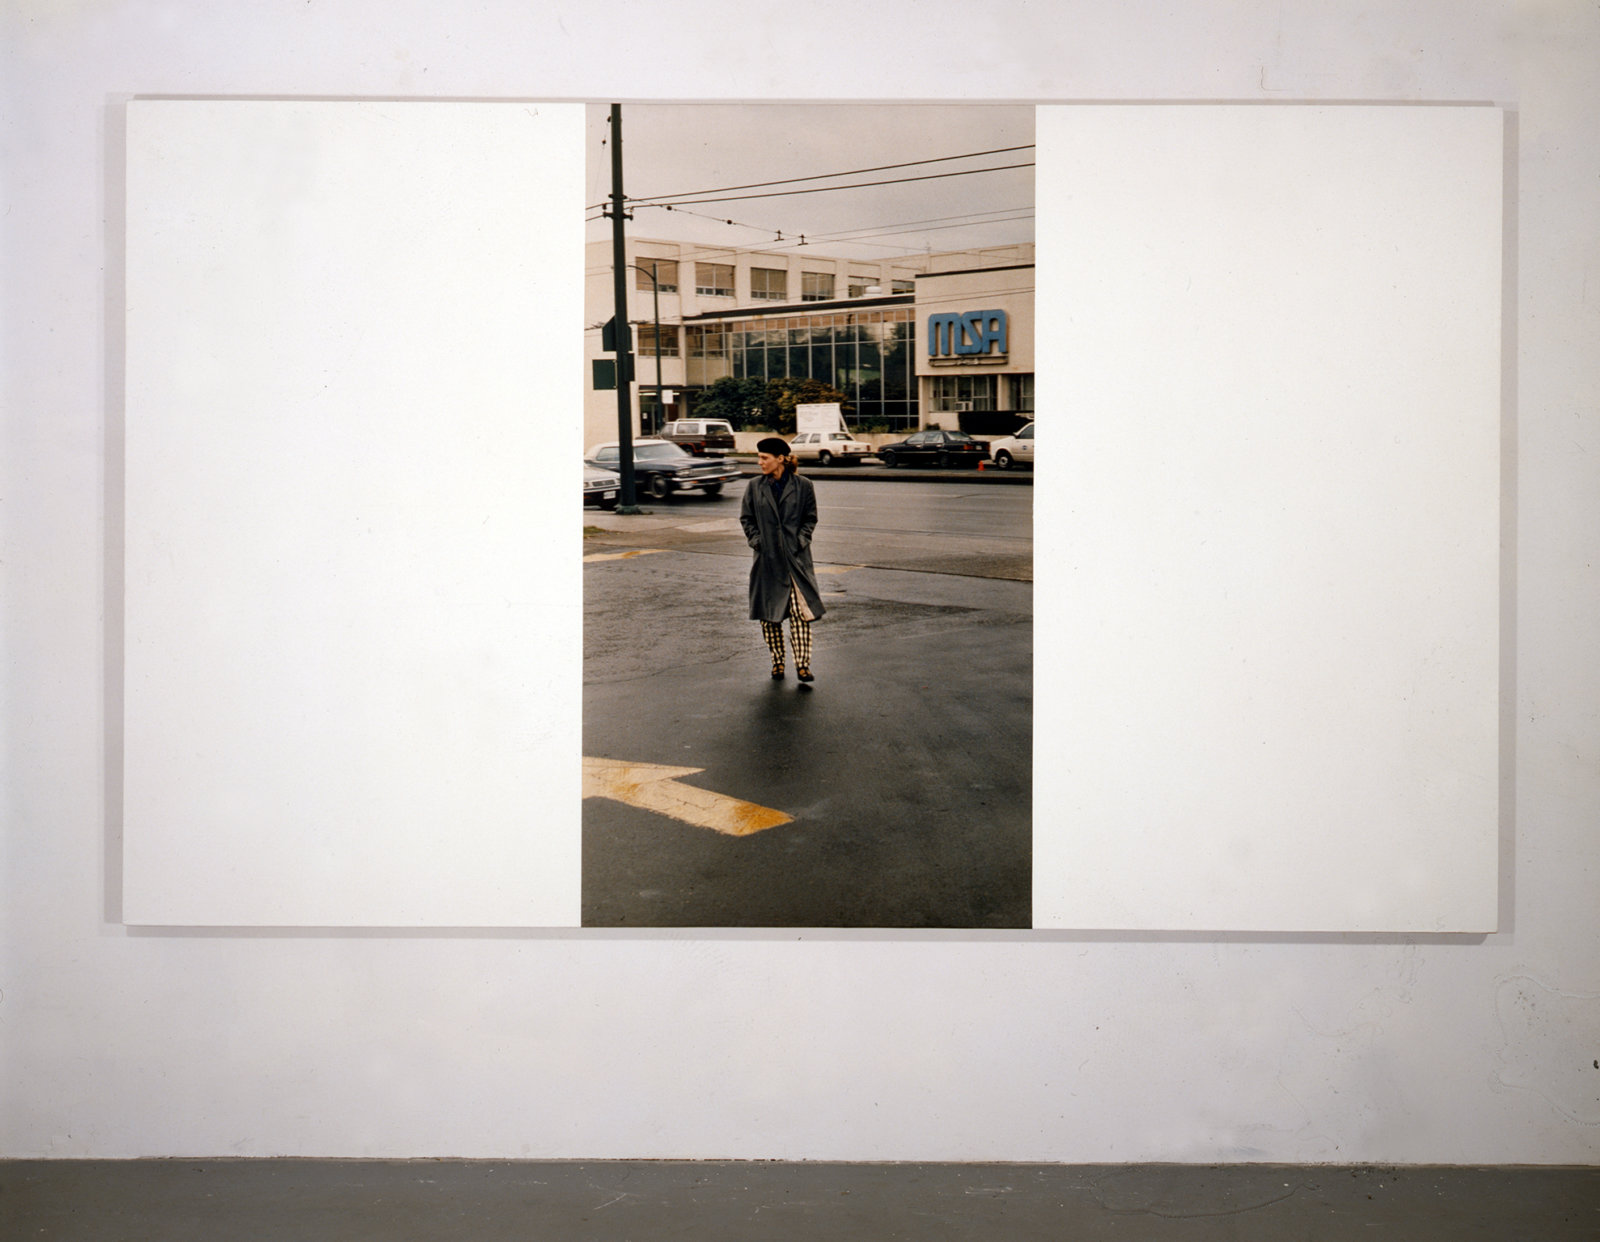 Ian Wallace, My Heroes in the Street V (Wendy), 1986–1989, photolaminate and acrylic on canvas, 72 x 120 in. (183 x 305 cm)